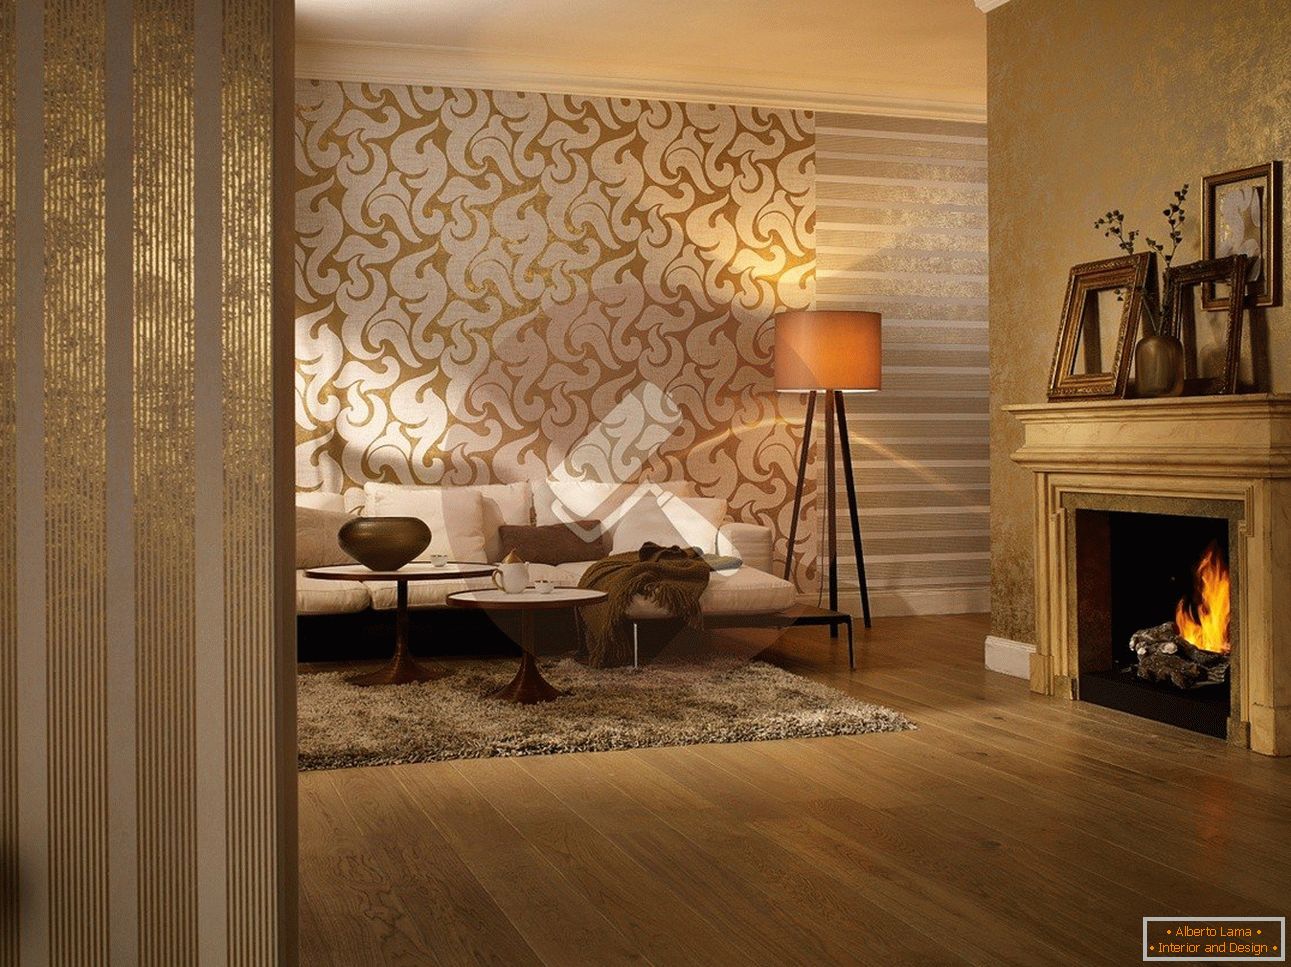 The combination of wallpaper in the decoration of the walls